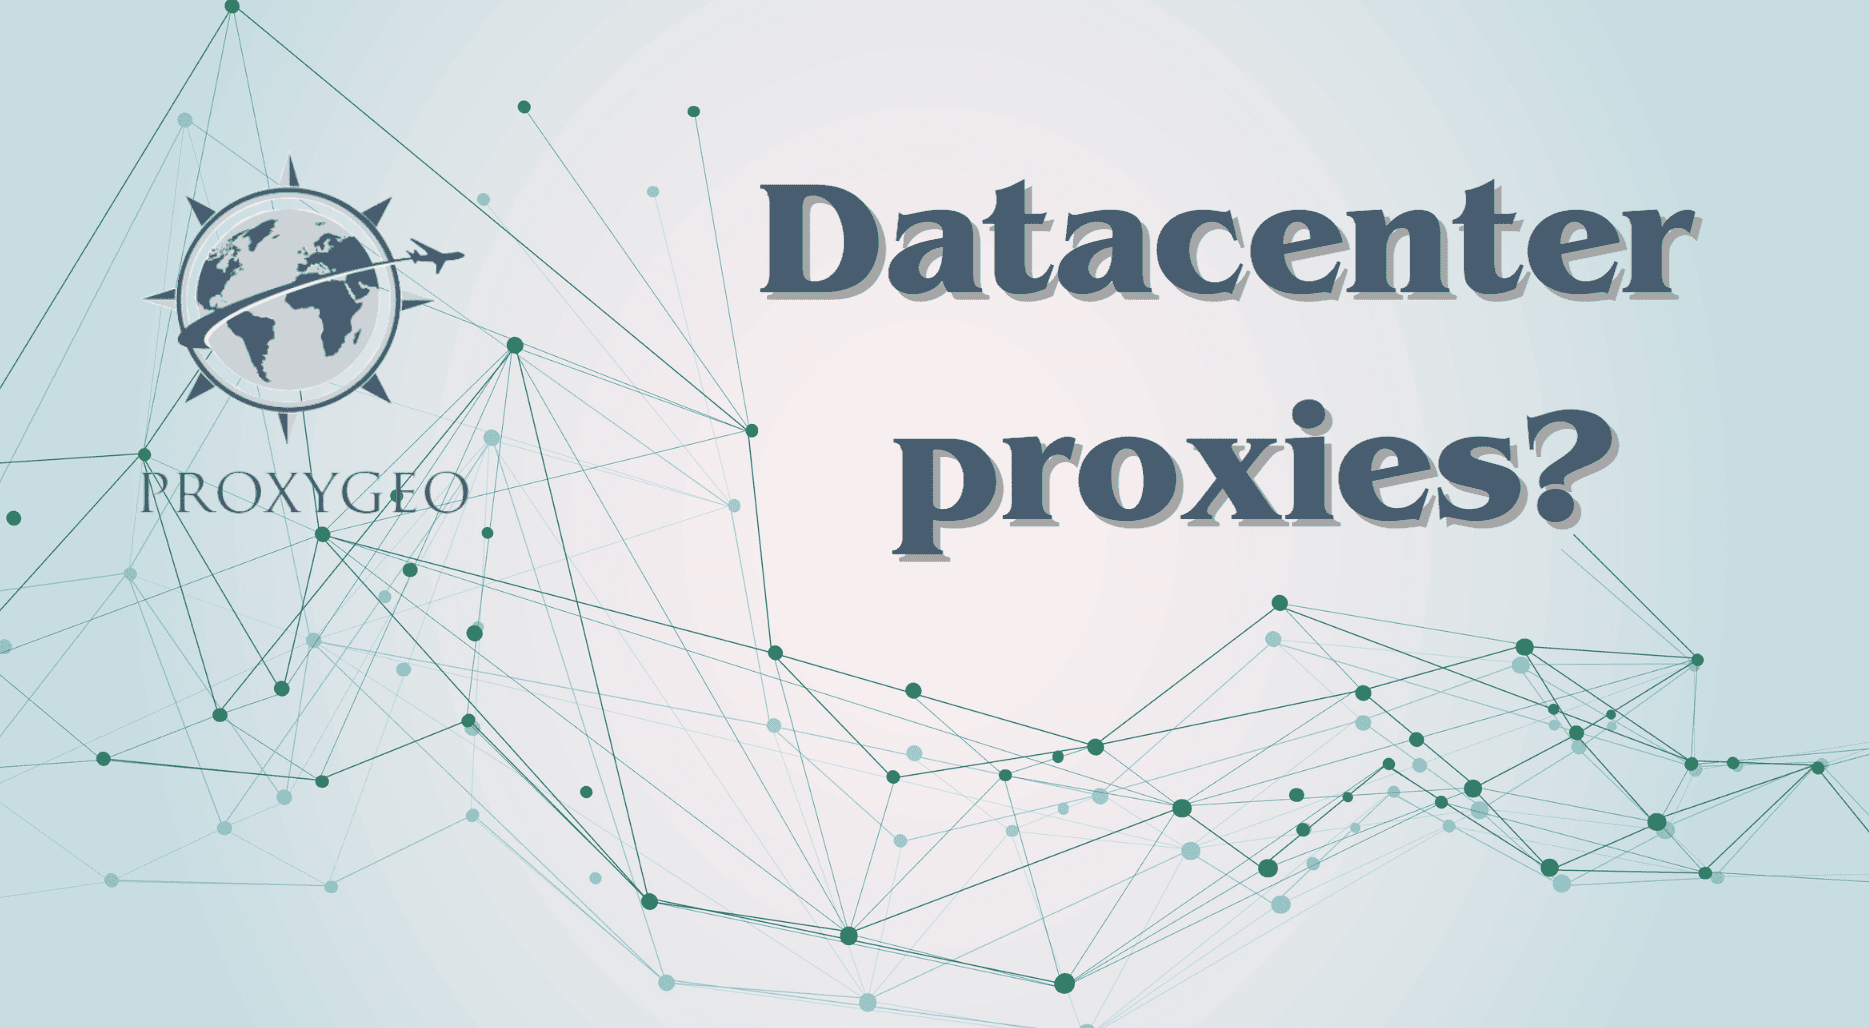 What are datacenter proxies?